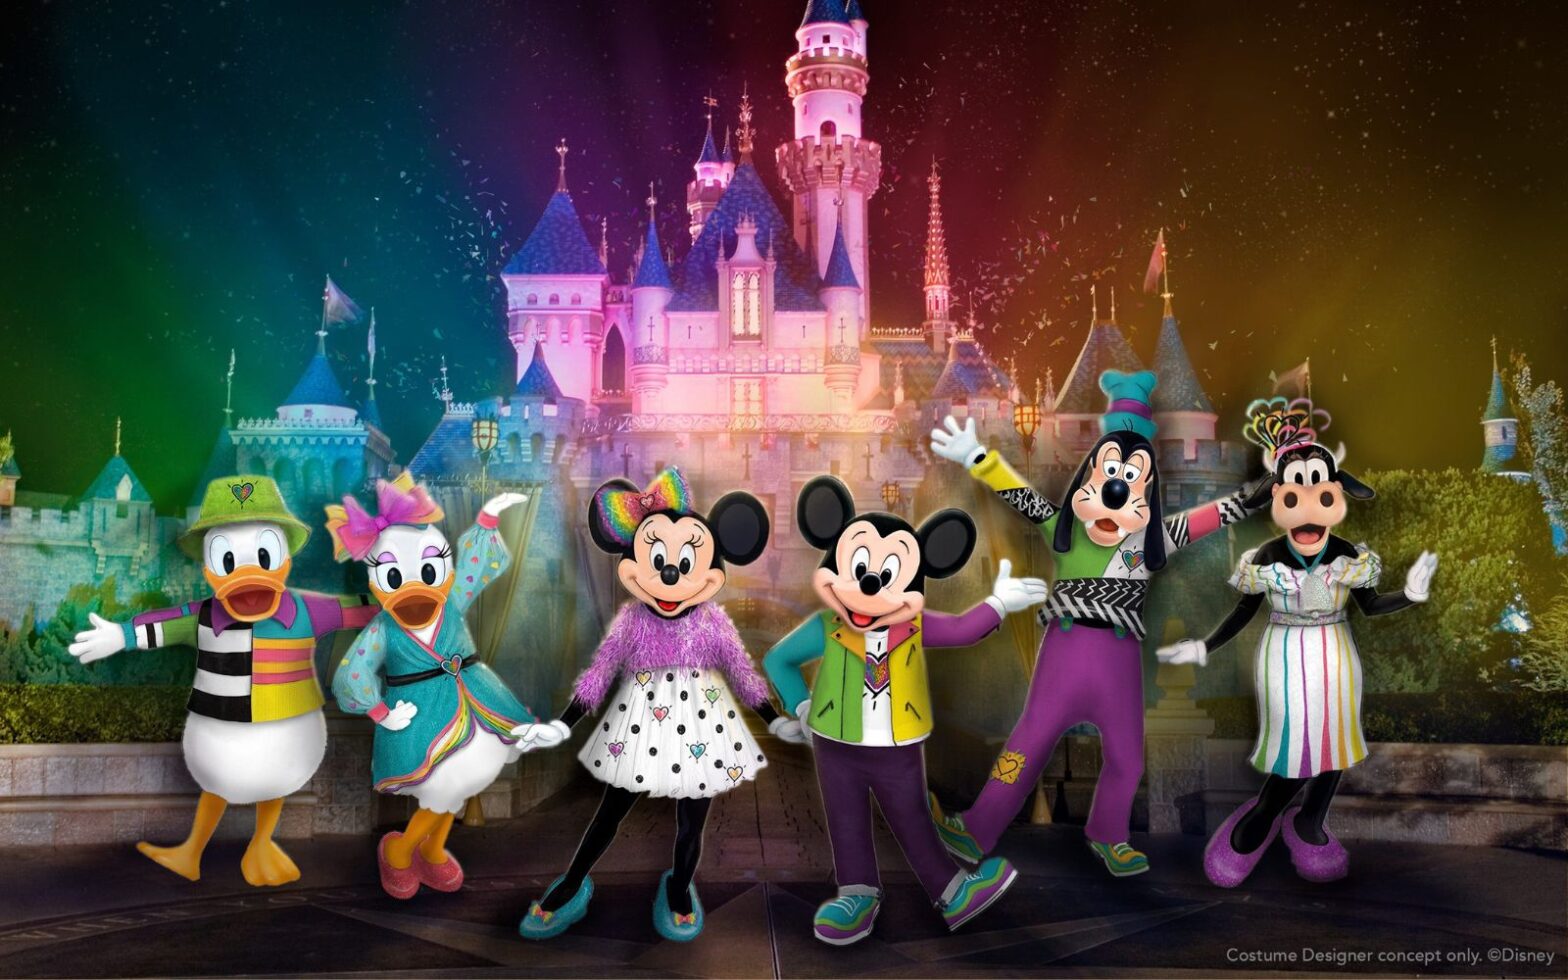 Mickey Mouse, Minnie Mouse, Clarabelle, Donald, Daisy and Goofy will debut new attire for Disneyland After Dark: Pride Nite